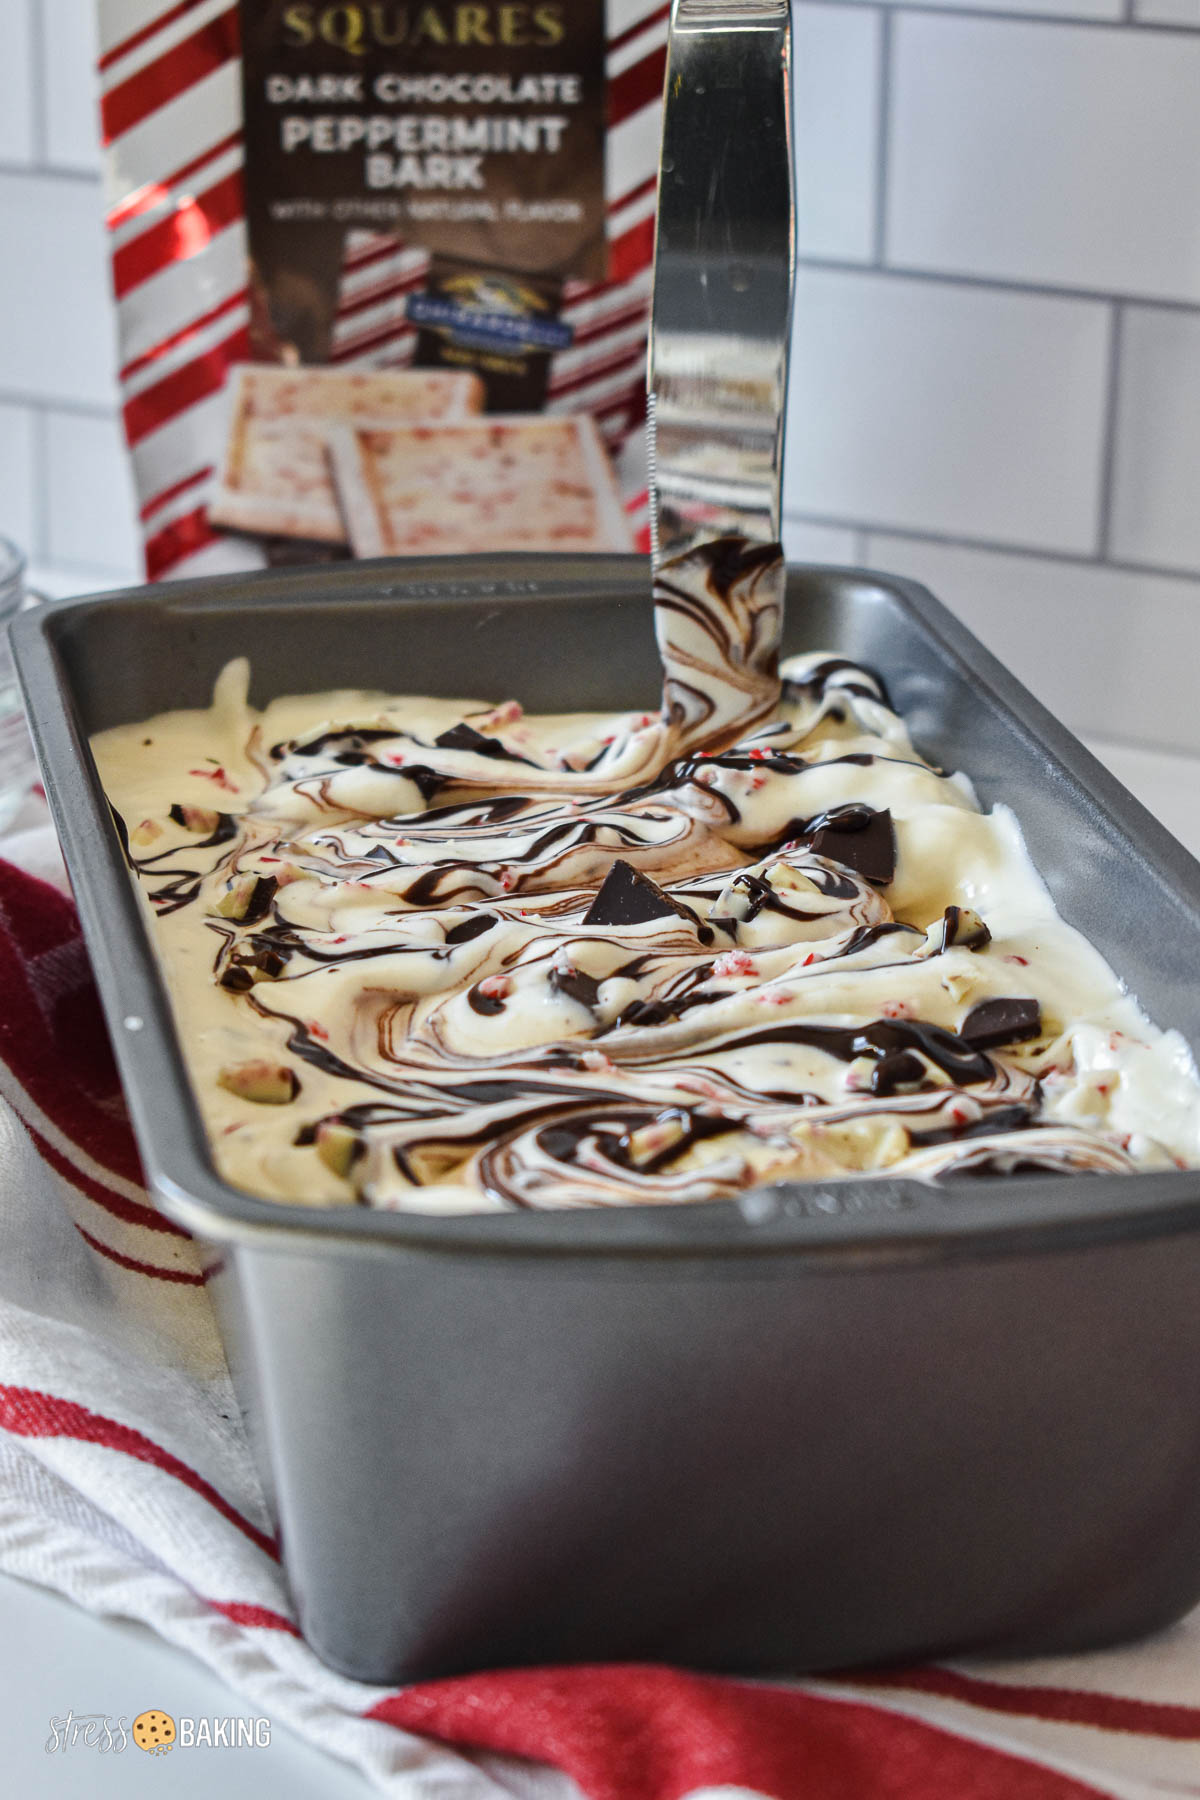 Black and white peppermint bark ice cream in a loaf tin with swirls of chocolate being swirled with a knife